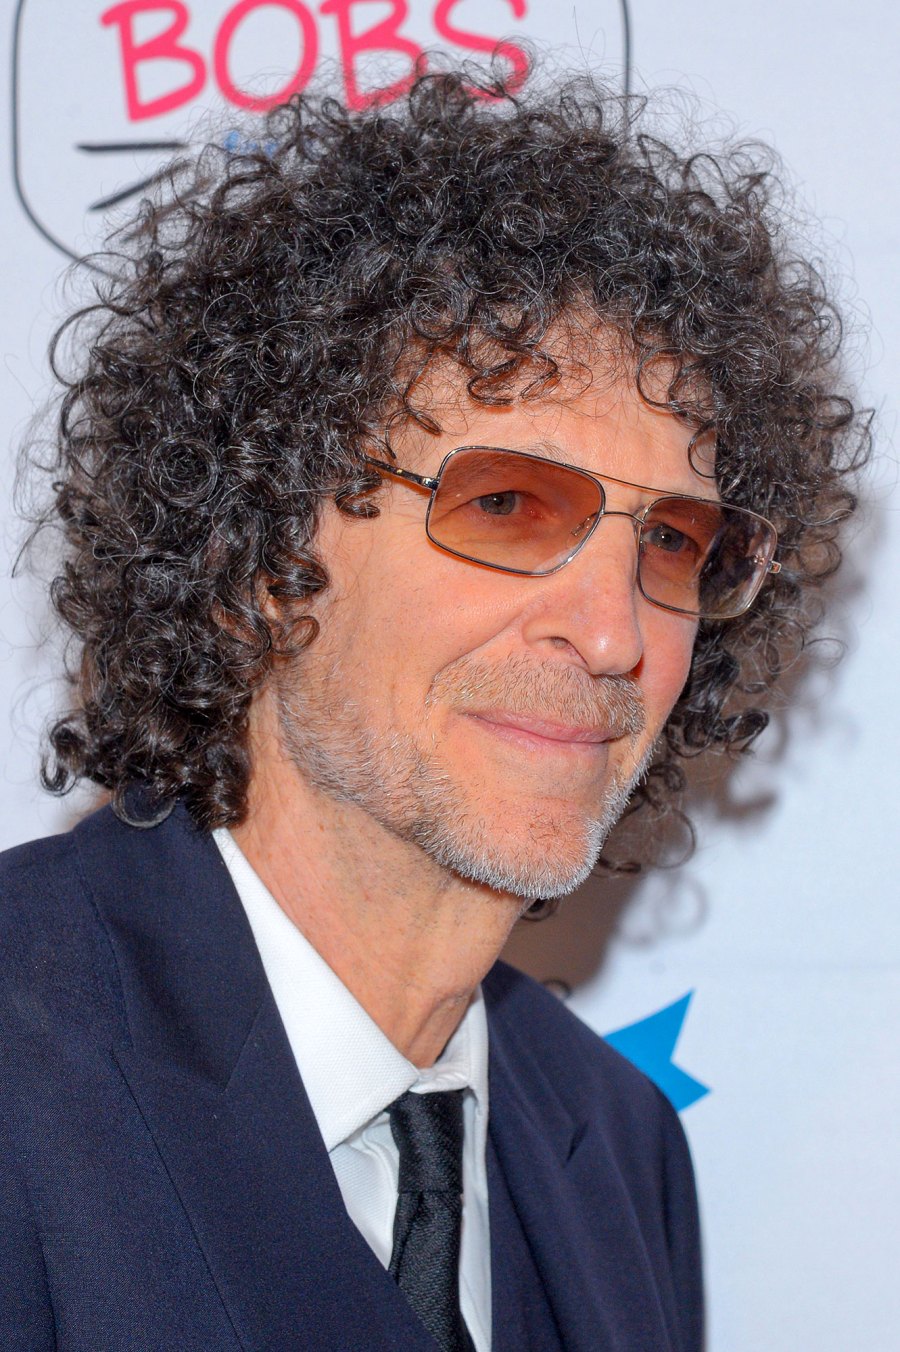 Howard Stern Celebrities Weigh In on TJ Holmes and Amy Robach GMA3 Drama